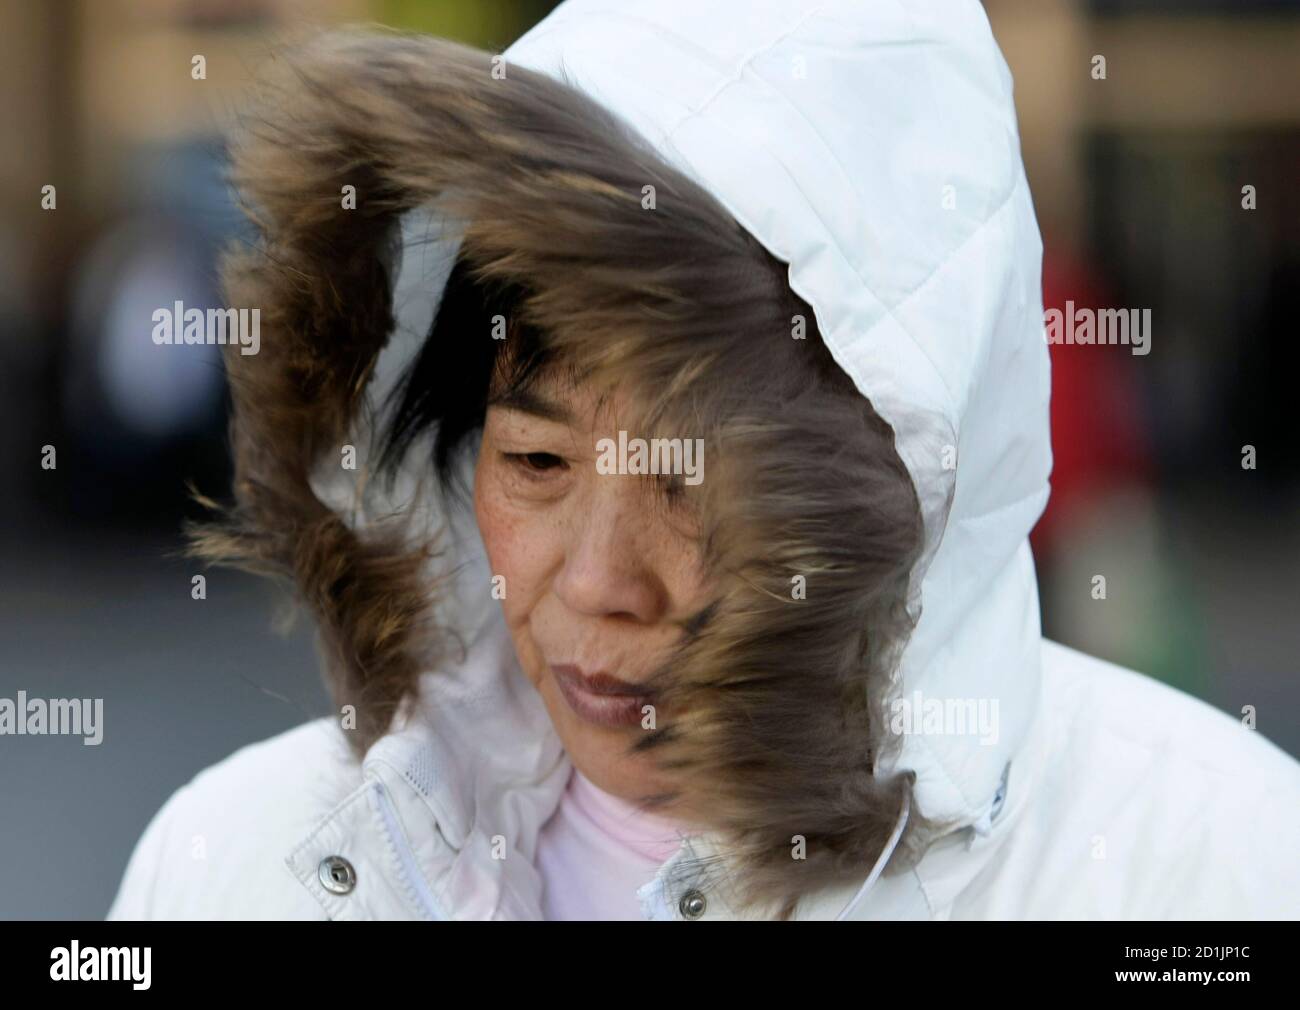 A woman wearing a coat walks in Beijing December 4, 2008. A Siberian cold front swept China on Thursday, with temperatures in the capital plunging below freezing and thousands stranded on snowbound expressways in the remote far northwest. REUTERS/Jason Lee (CHINA) Stock Photo